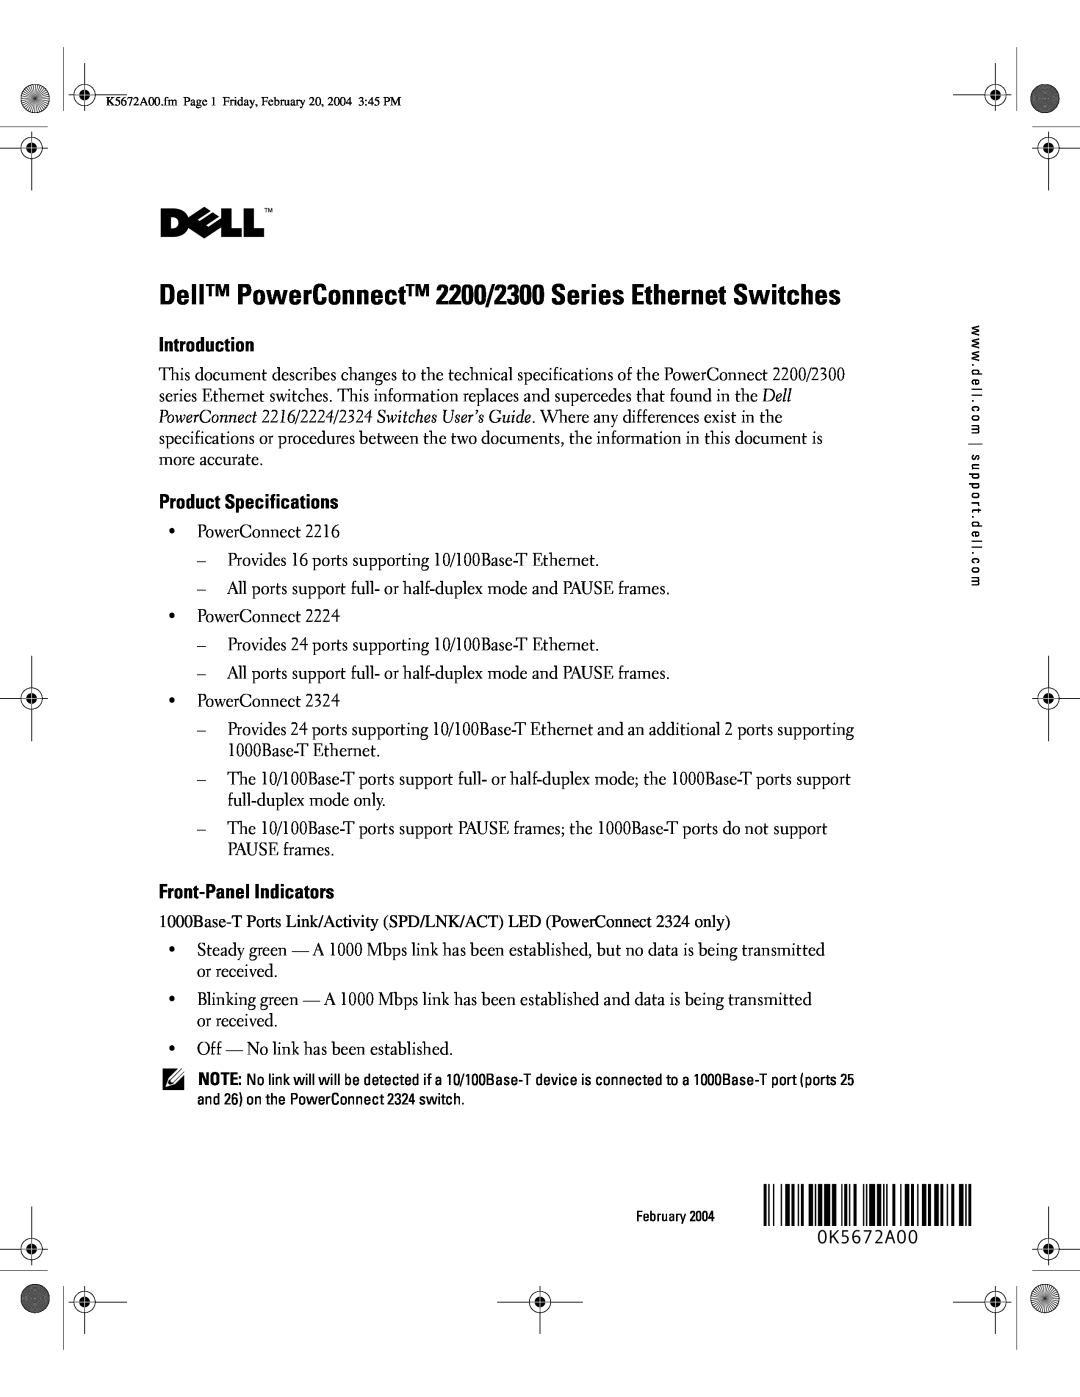 Dell 2300 technical specifications Dell Dimension, Hints, Notices, and Cautions, Abbreviations and Acronyms 